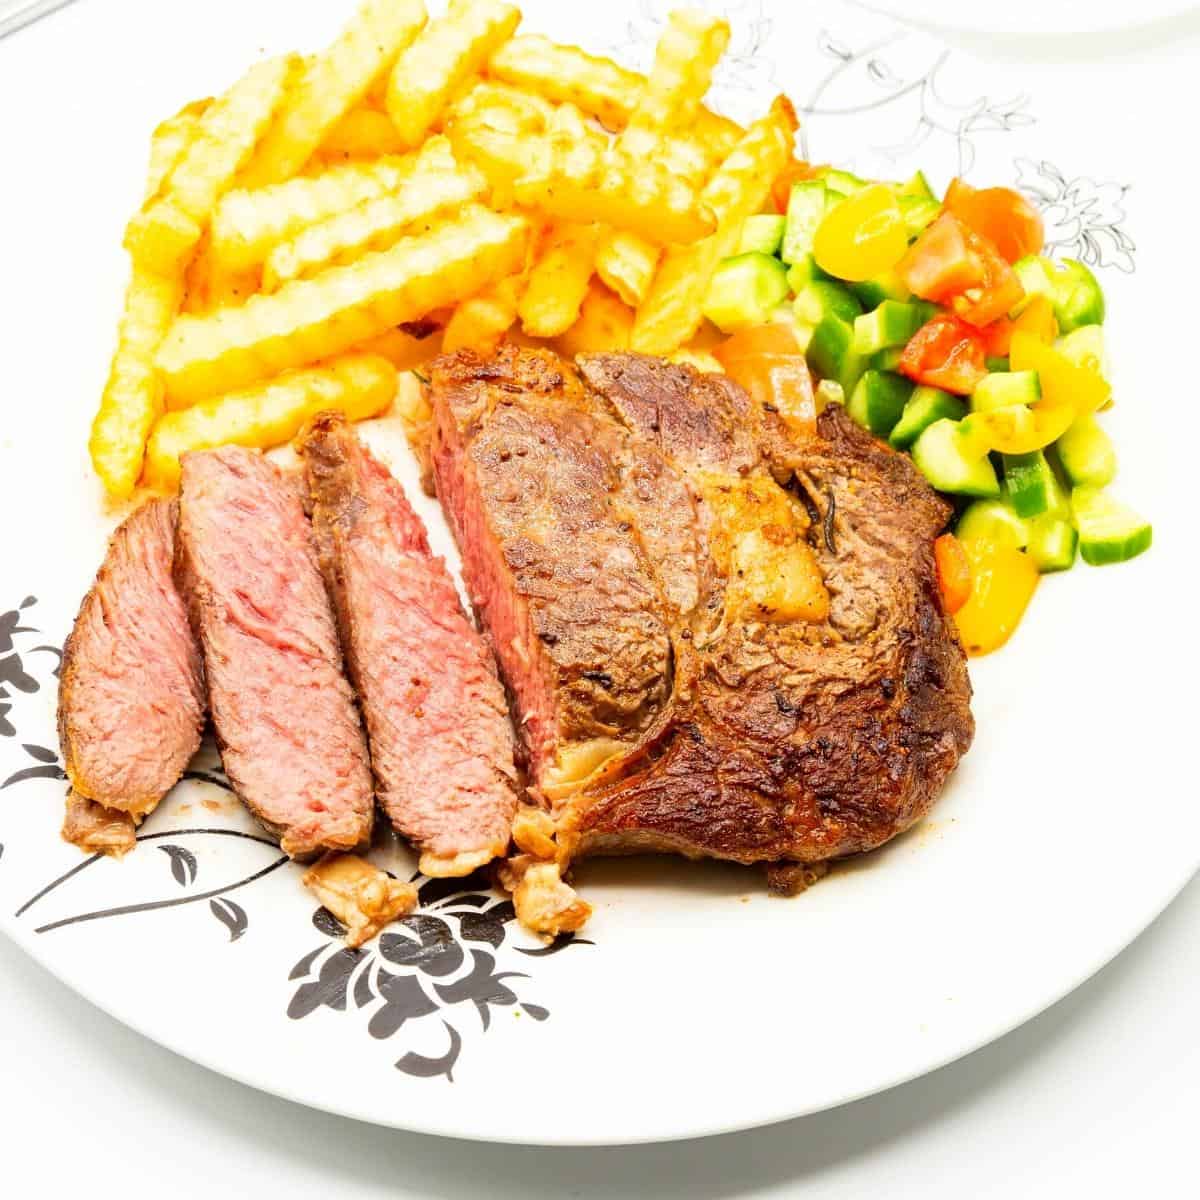 A plate with steak fries and salad.